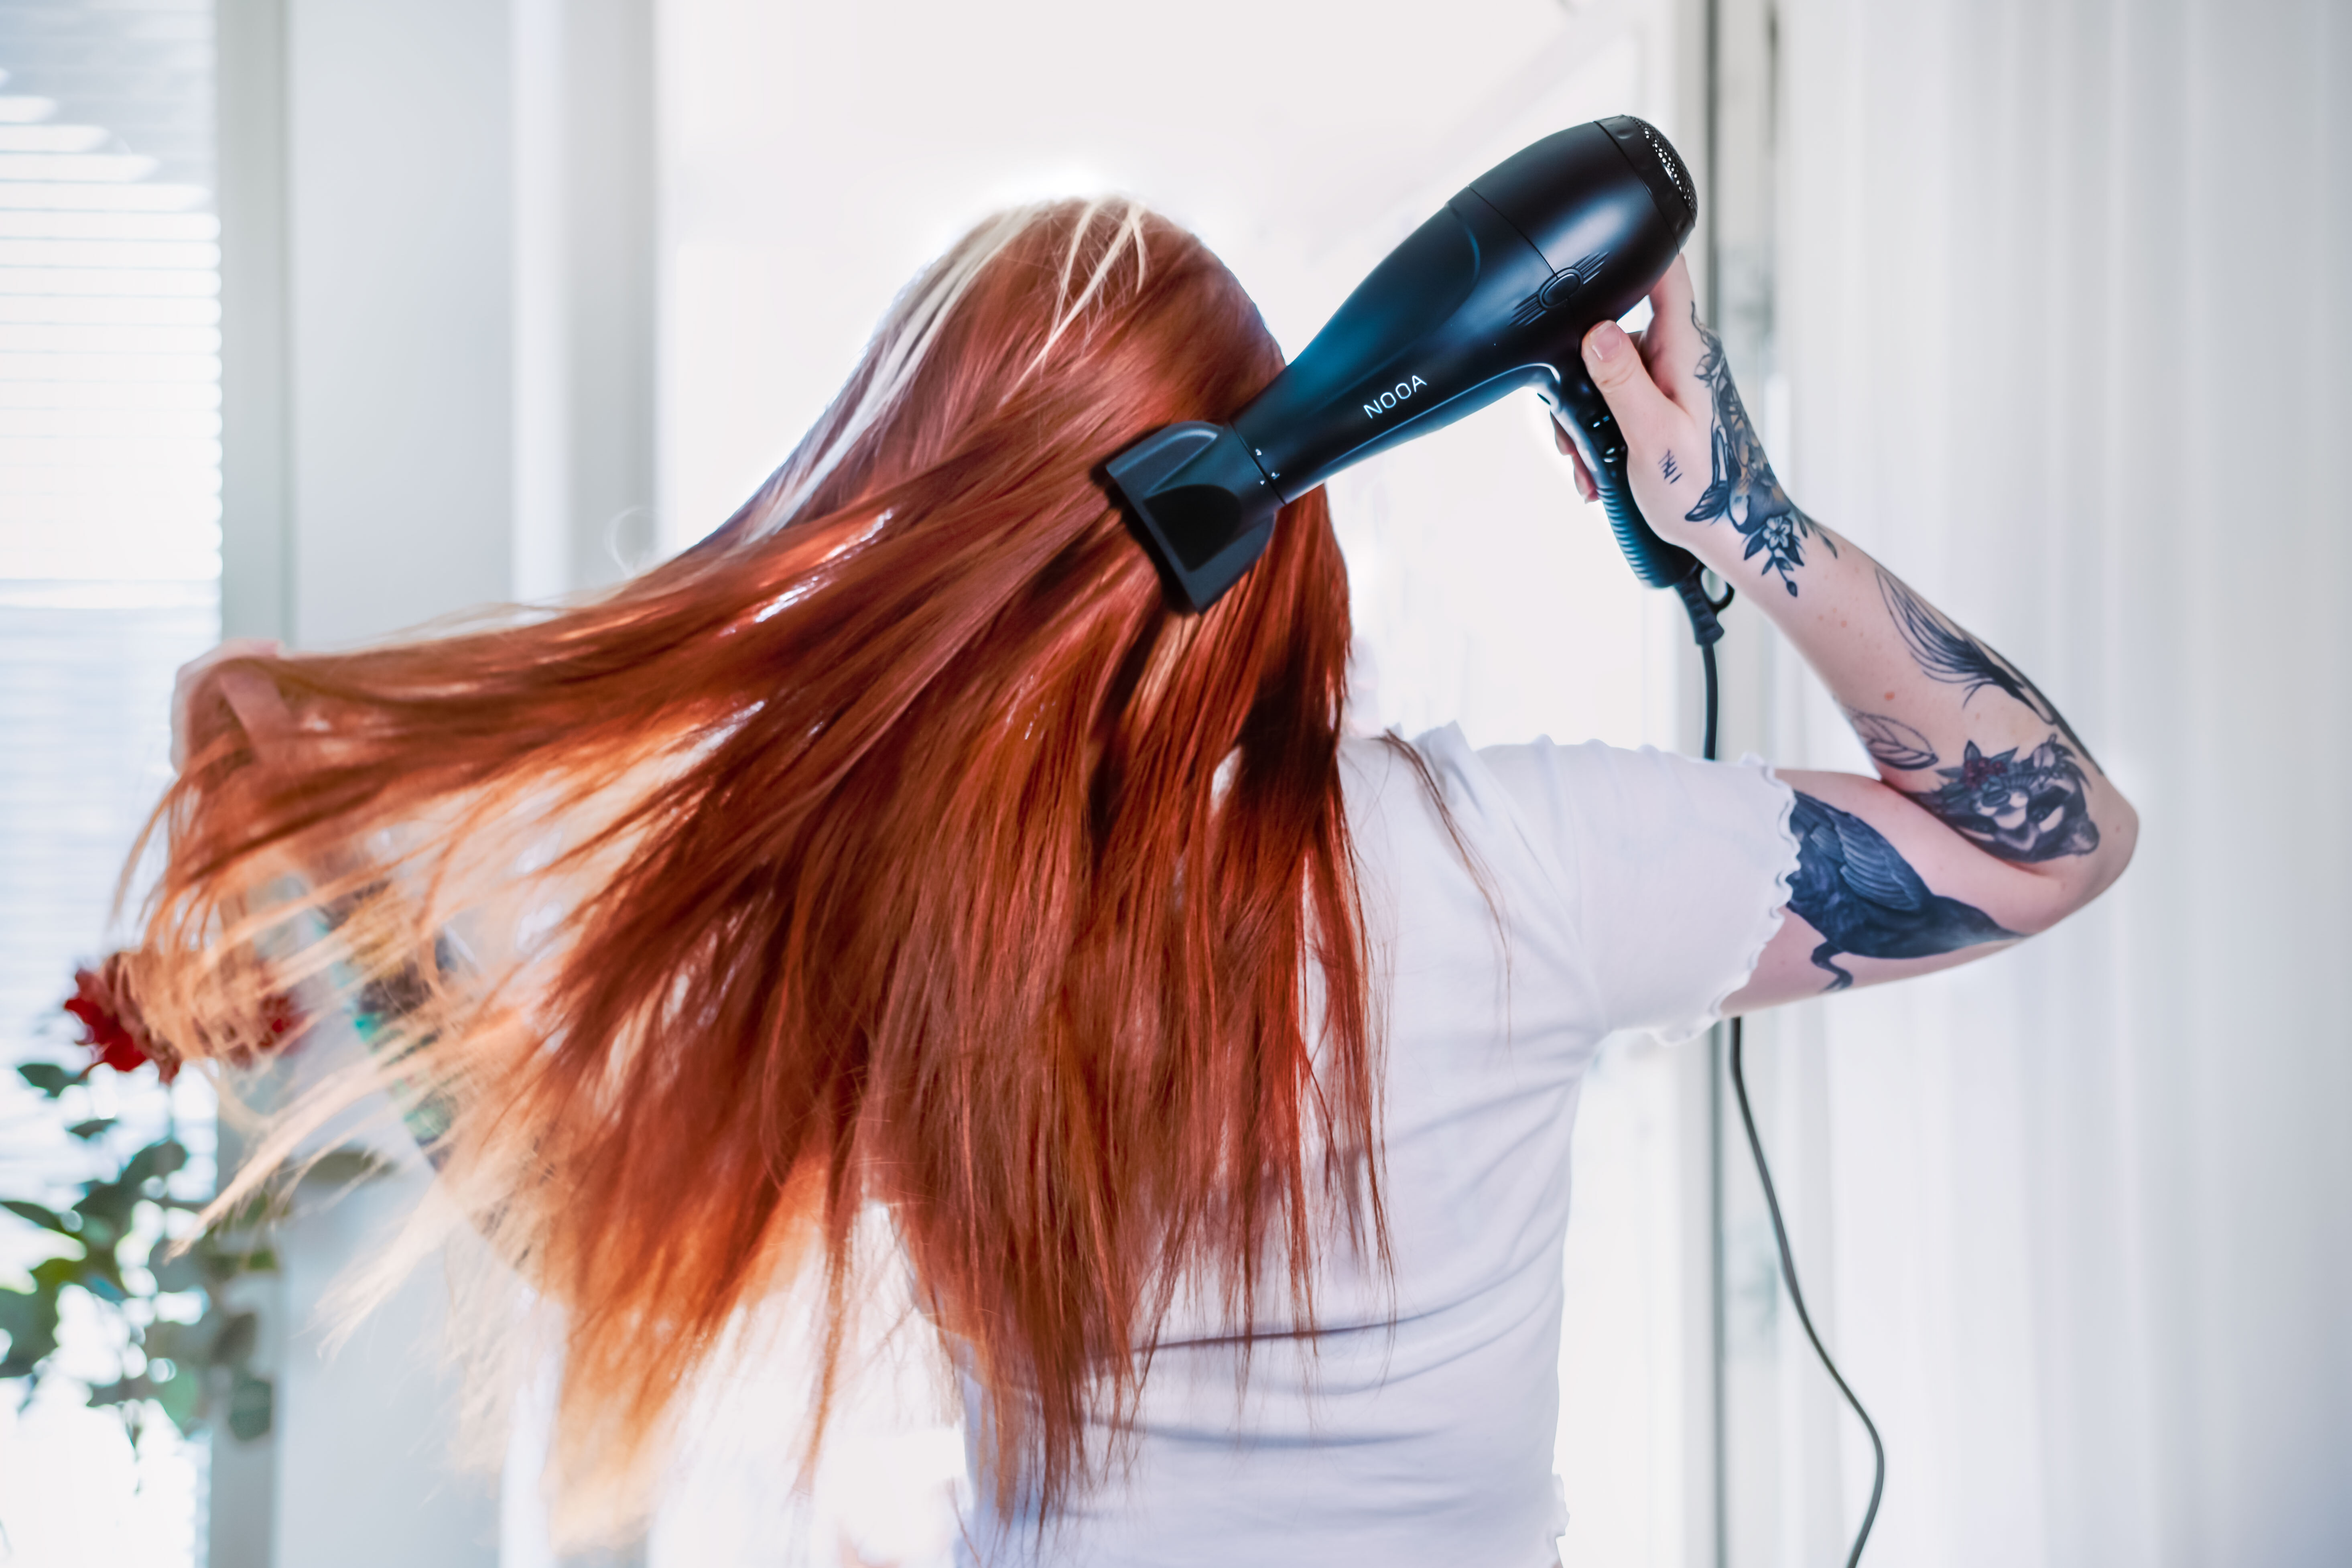 Woman using the hairdryer in front of the balcony door from behind